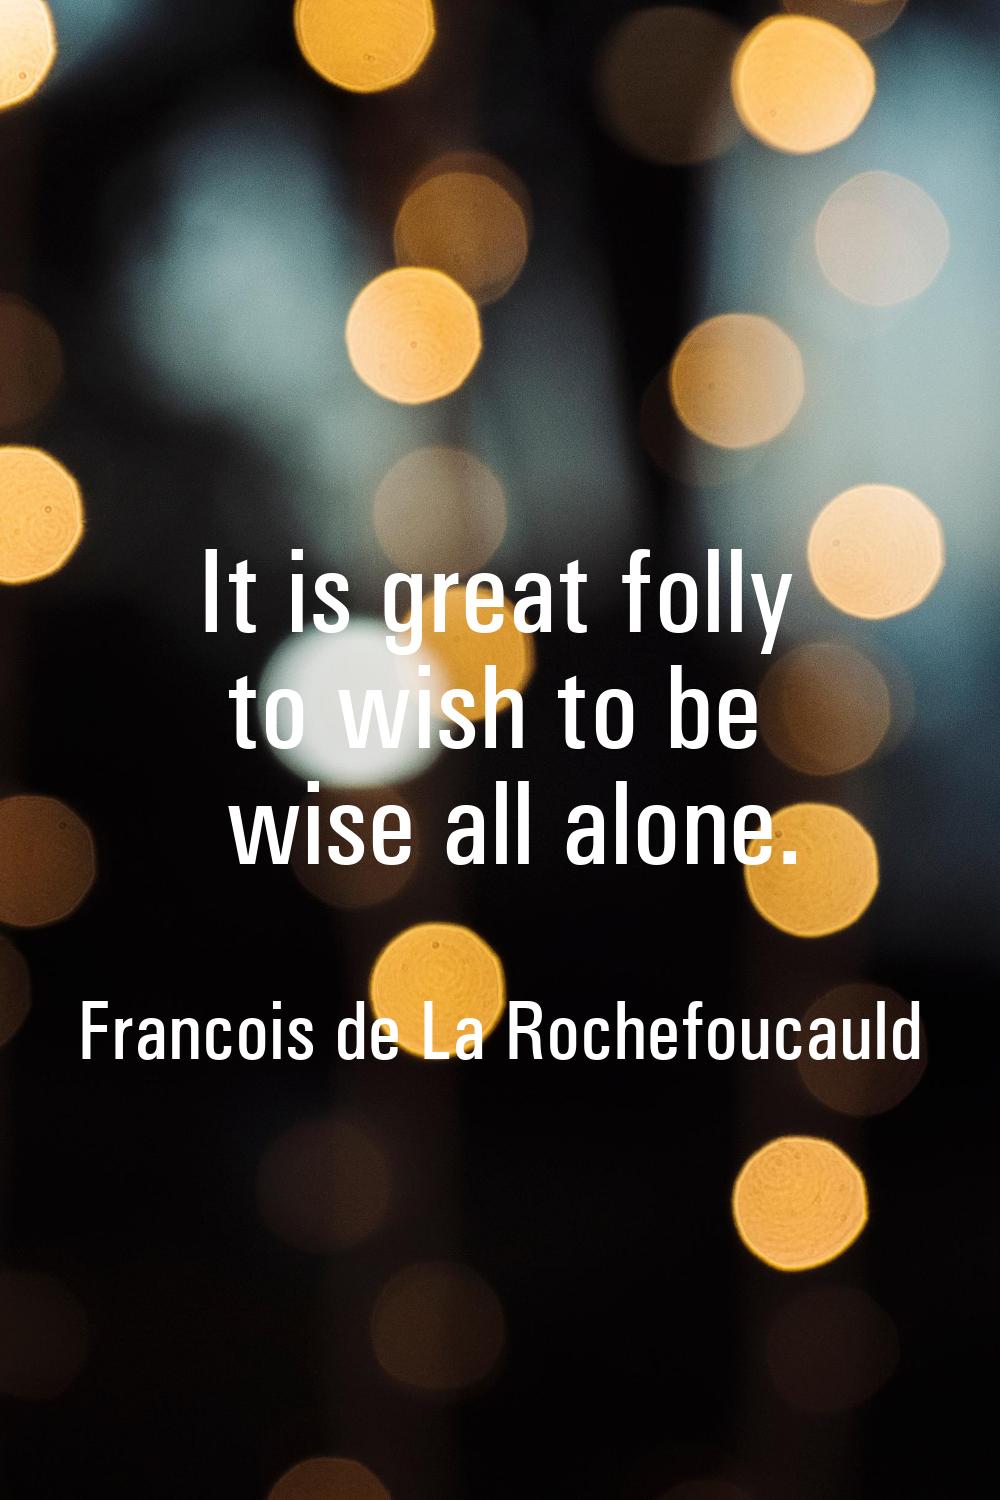 It is great folly to wish to be wise all alone.